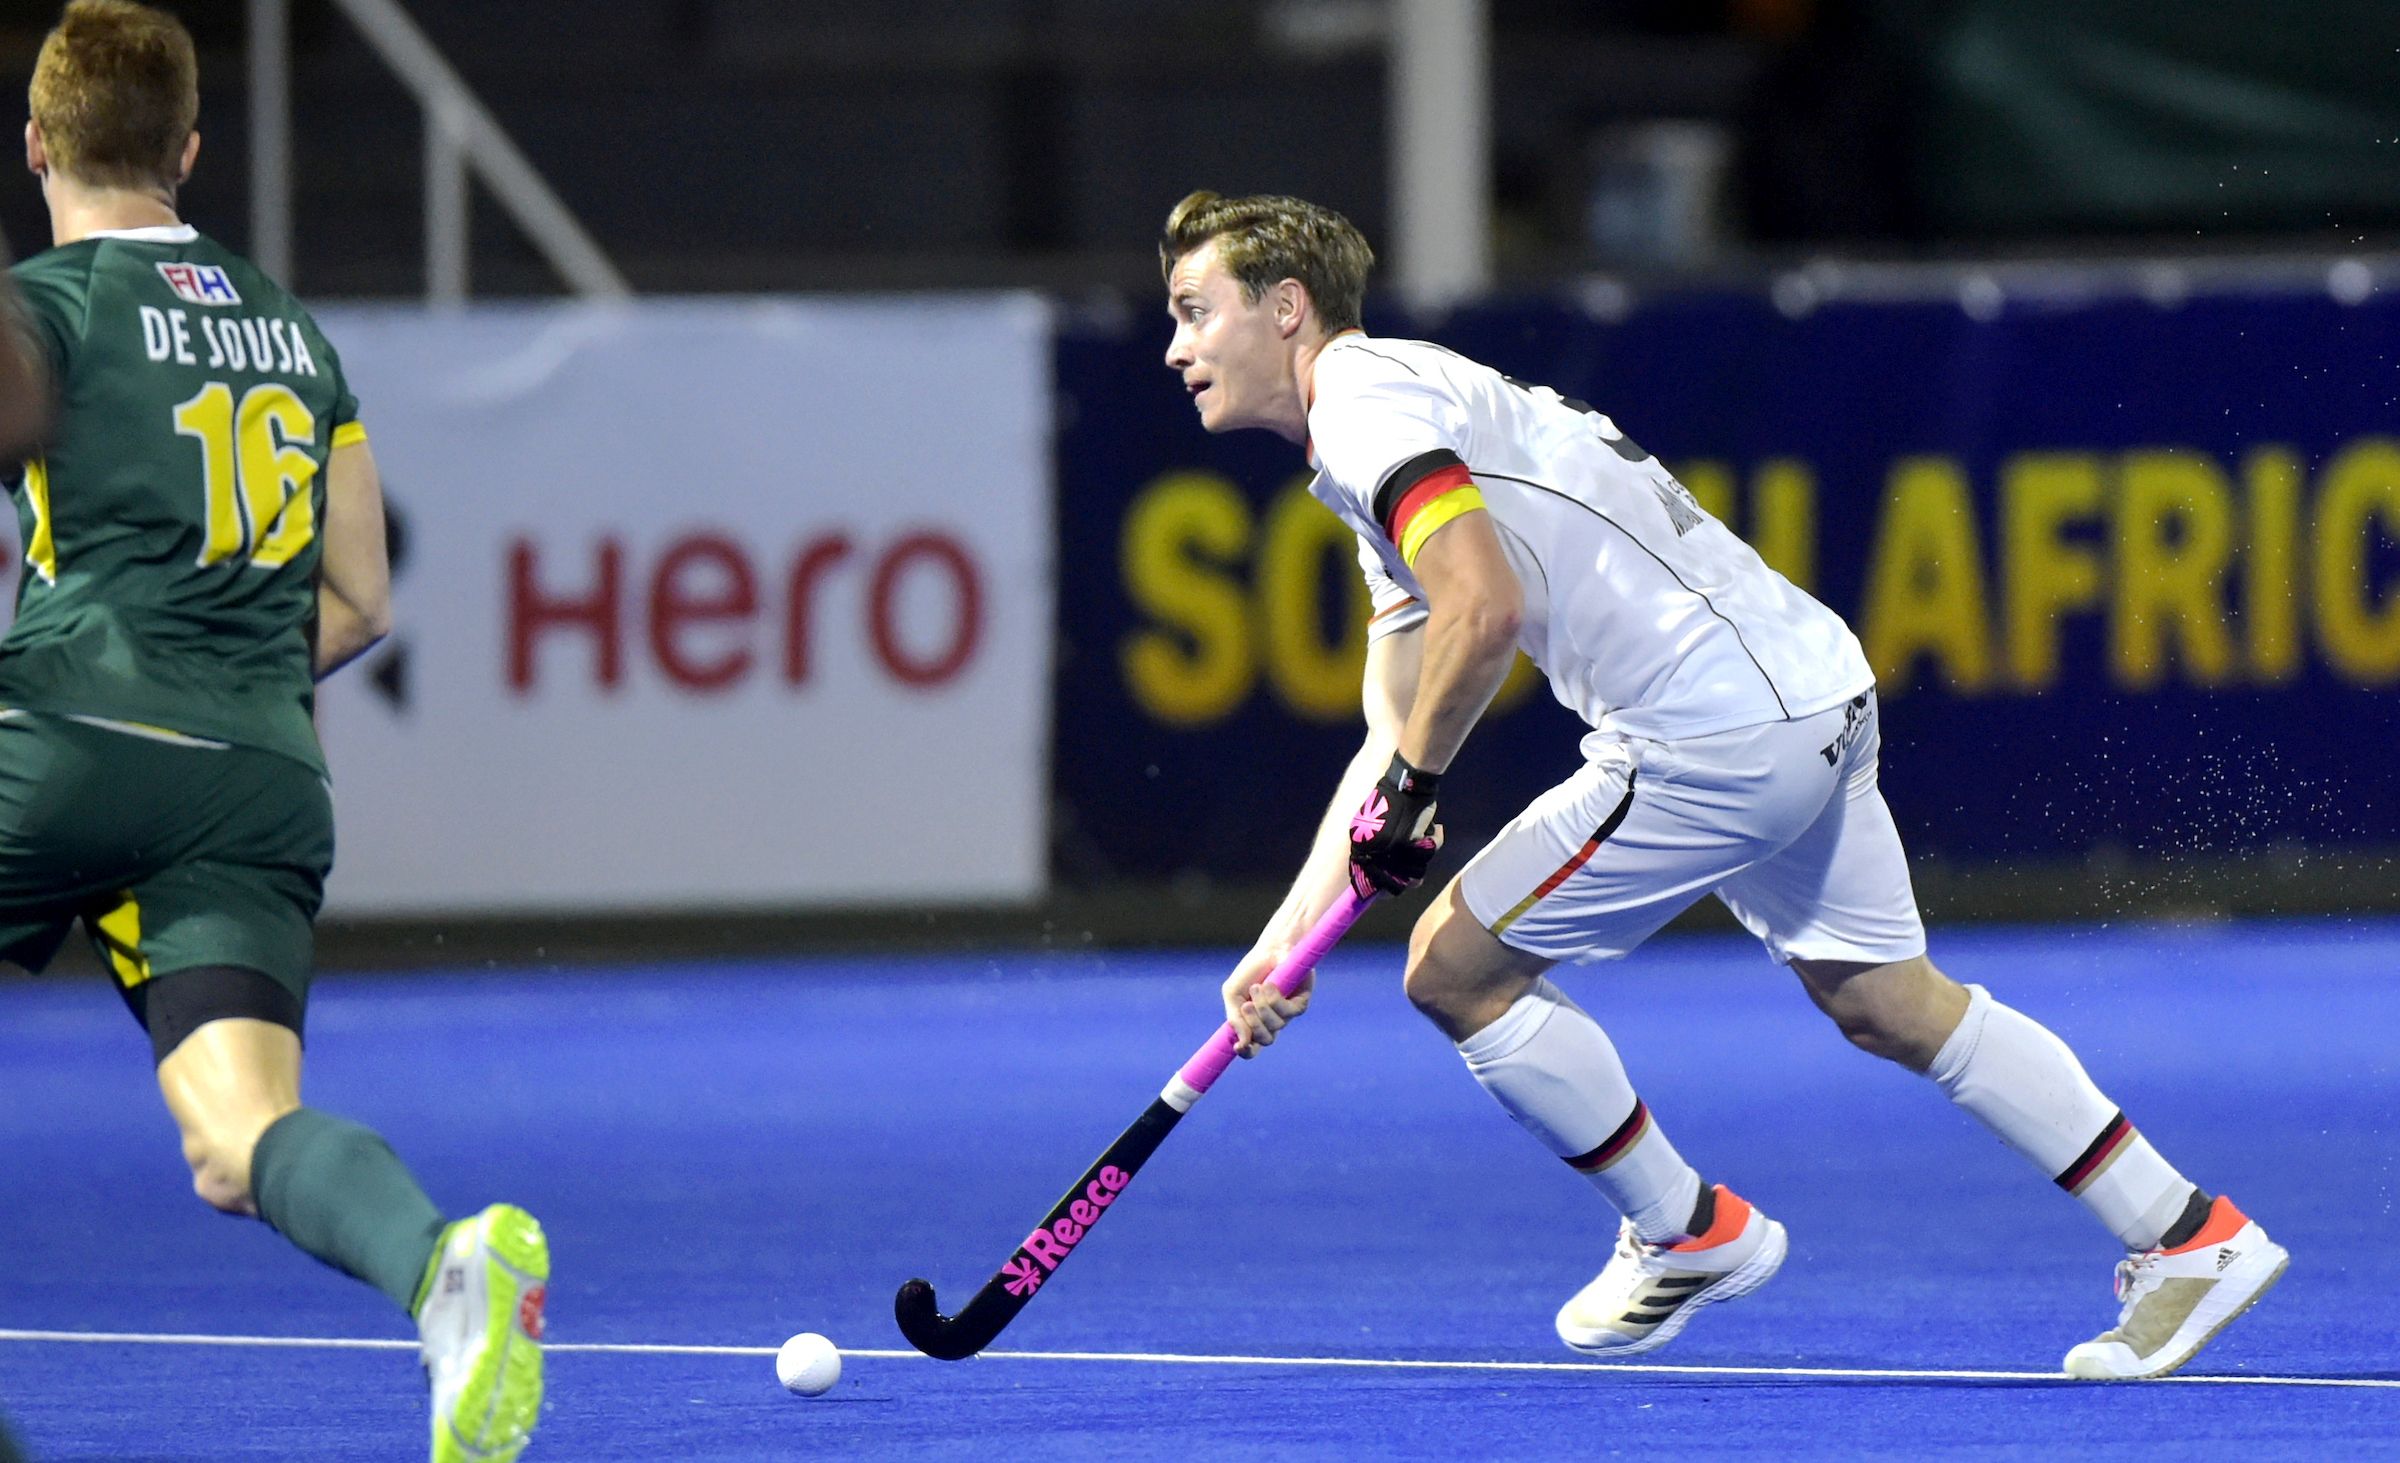 PL2 RSA GER B - 4 from 4 for Germany in Pro-League - The German men were the only team to win all four games at the Pro-League event in South Africa, which was played in tournament form for the first time. After the 3:2 and 4:2 over France and the 6:1 in the first